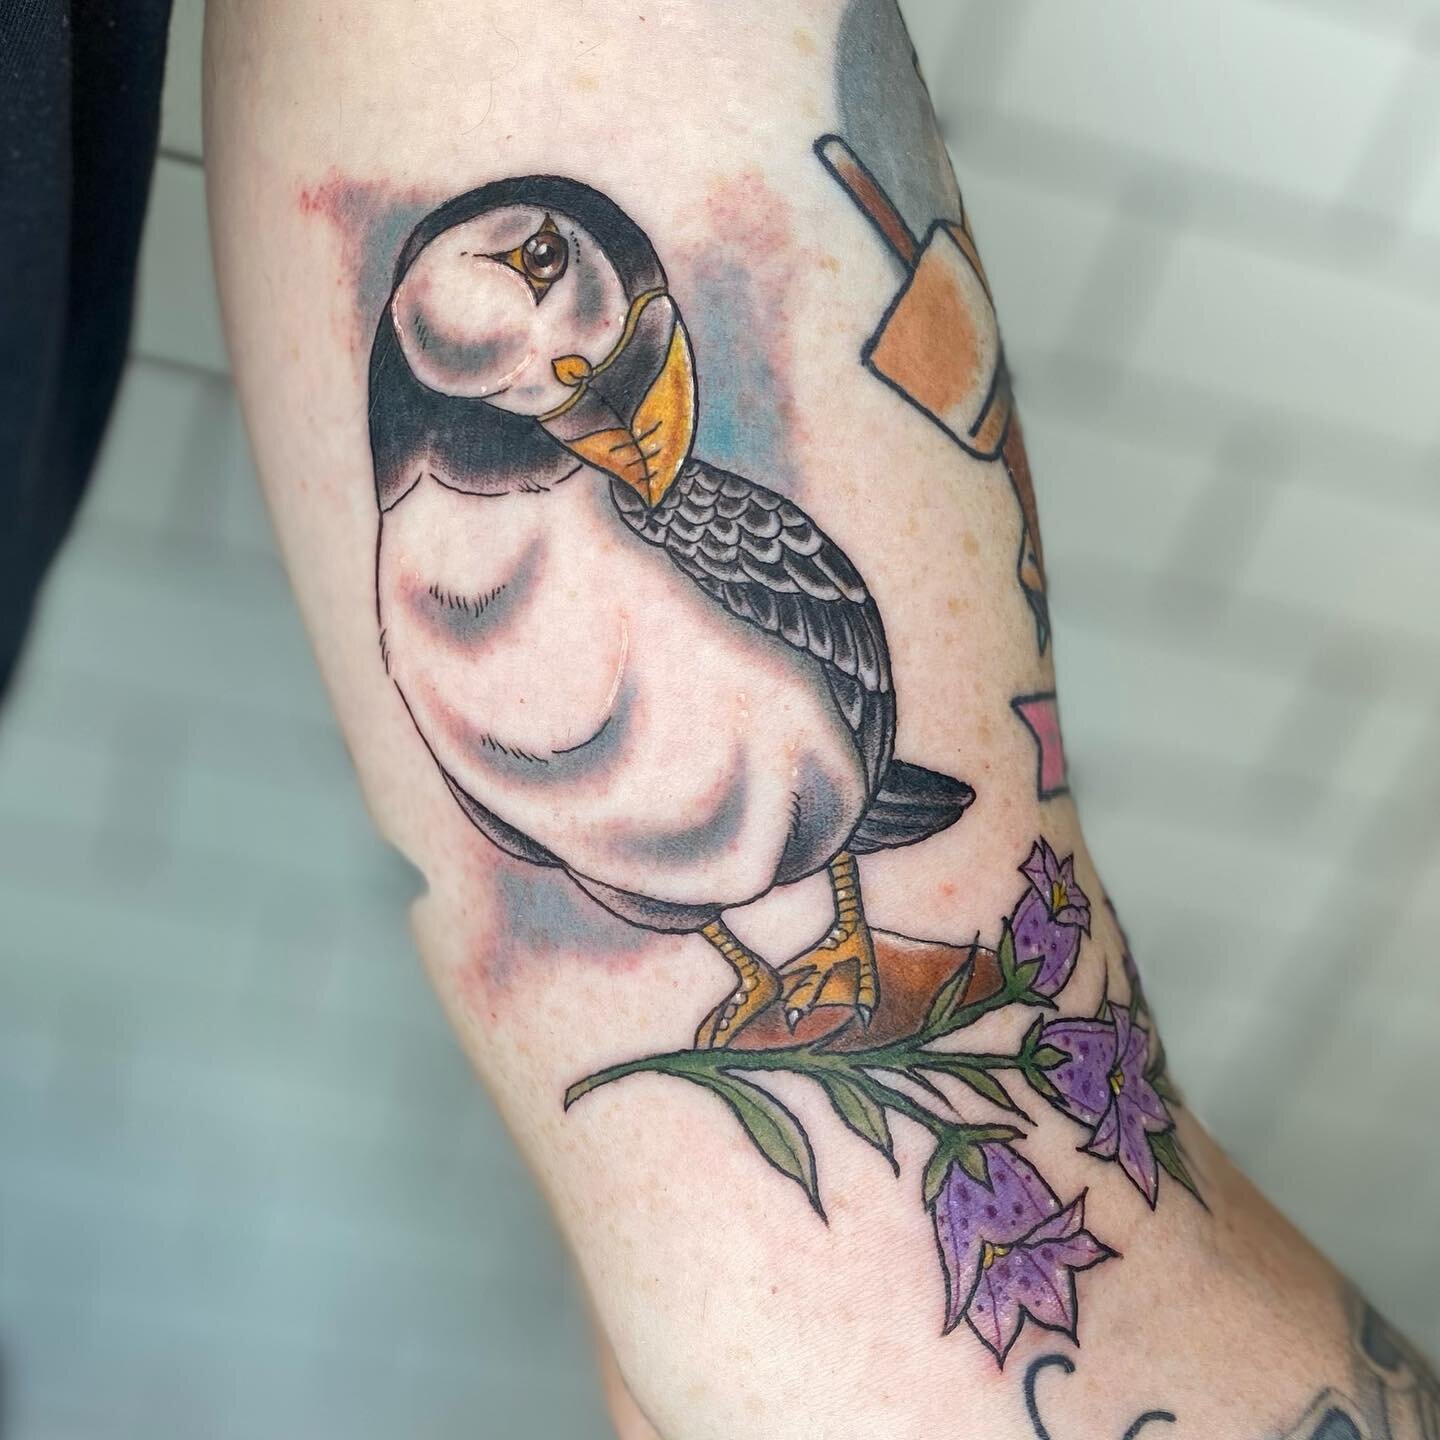 Puffin tattoo today has me extra excited for the @st.johnstattooconvention 🐦 tattoosbyloorin@gmail.com for appointments here or there 
.
.
.
.
#puffin#puffintattoo#newfoundlandtattoo#bluebells#floraltattoo#birdtattoo#vegantattoo#vegantattooartist#ve